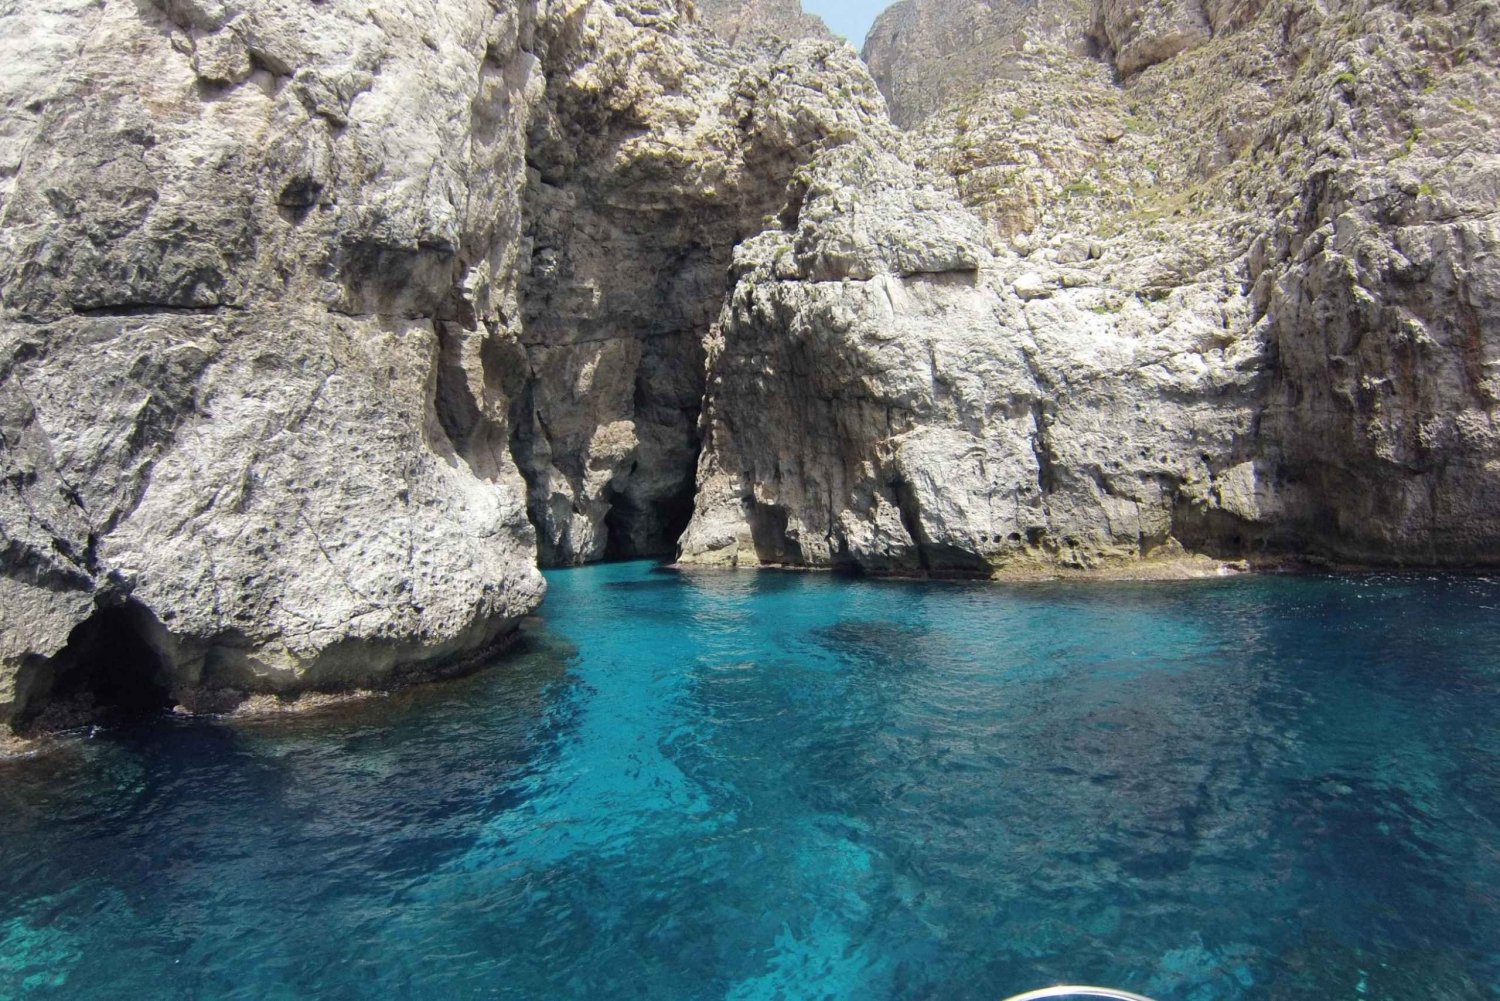 Trapani: Marettimo Island and Sea Caves Boat Tour with Lunch